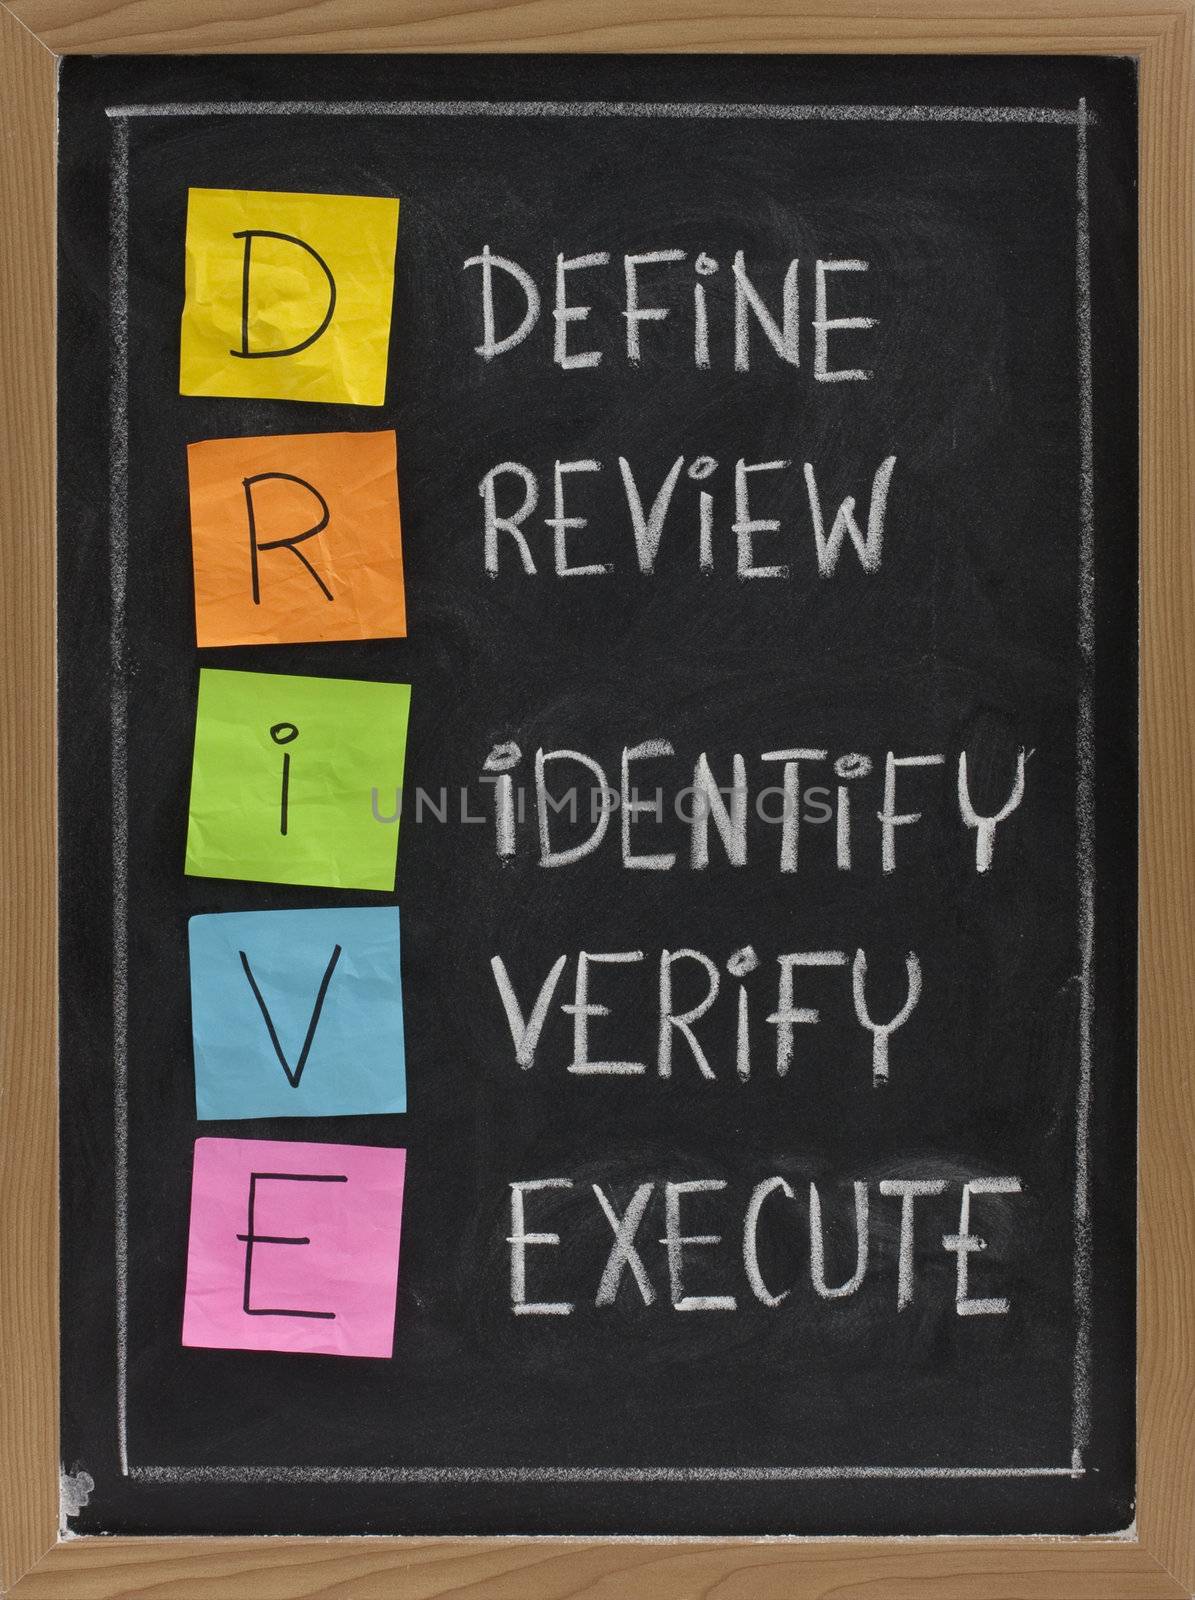 DRIVE (Define, Review, Identify, Verify, Execute) - acronym used in quality management, color sticky notes and white chalk handwriting on blackboard